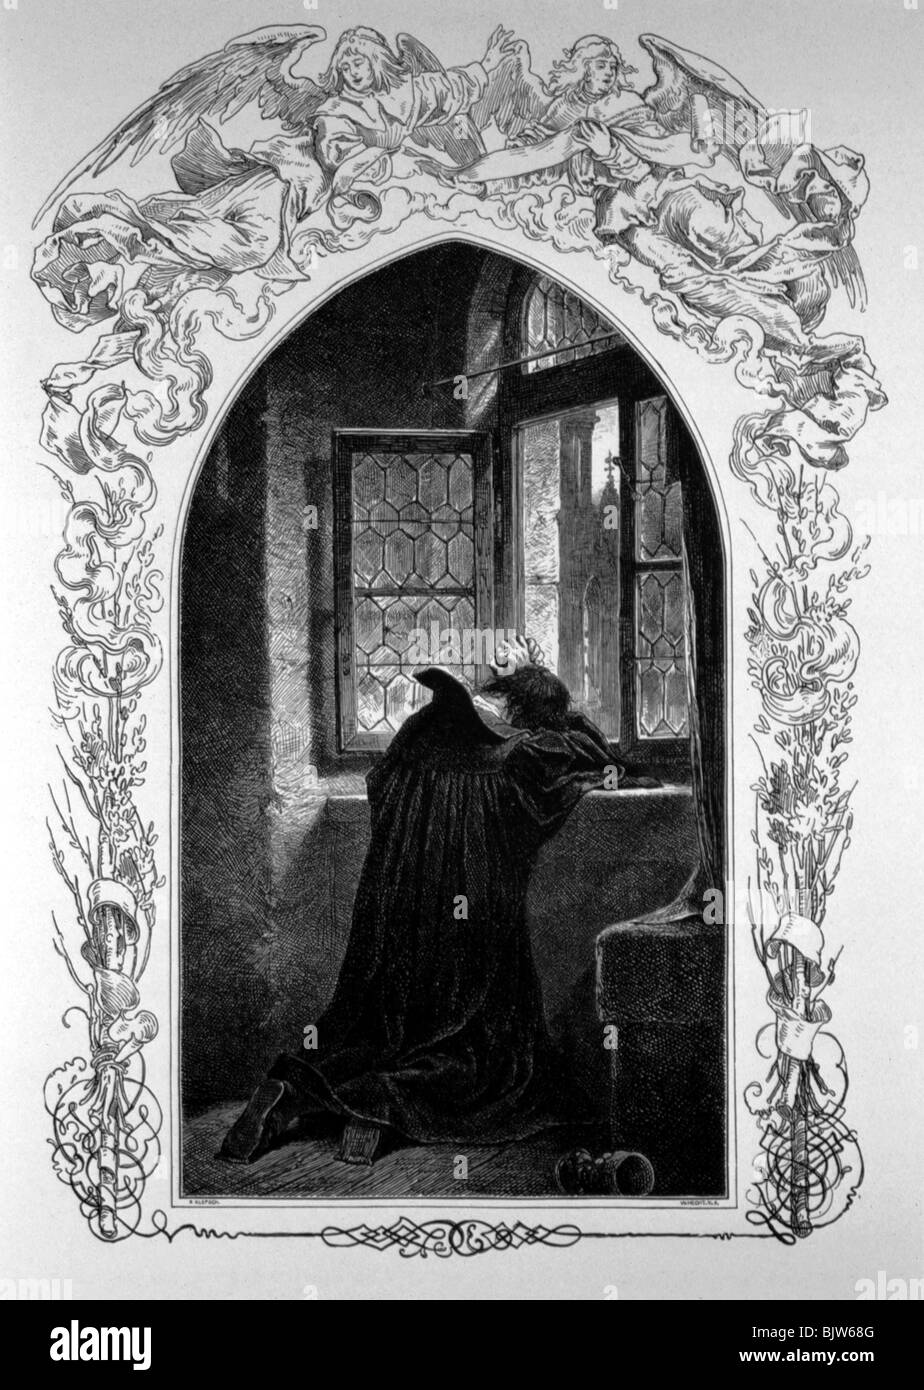 literature, 'Faust I', 1st scene, 'Study', scene with Faust, wood engraving by Alexander Liezen Mayer, circa 1870, Stock Photo